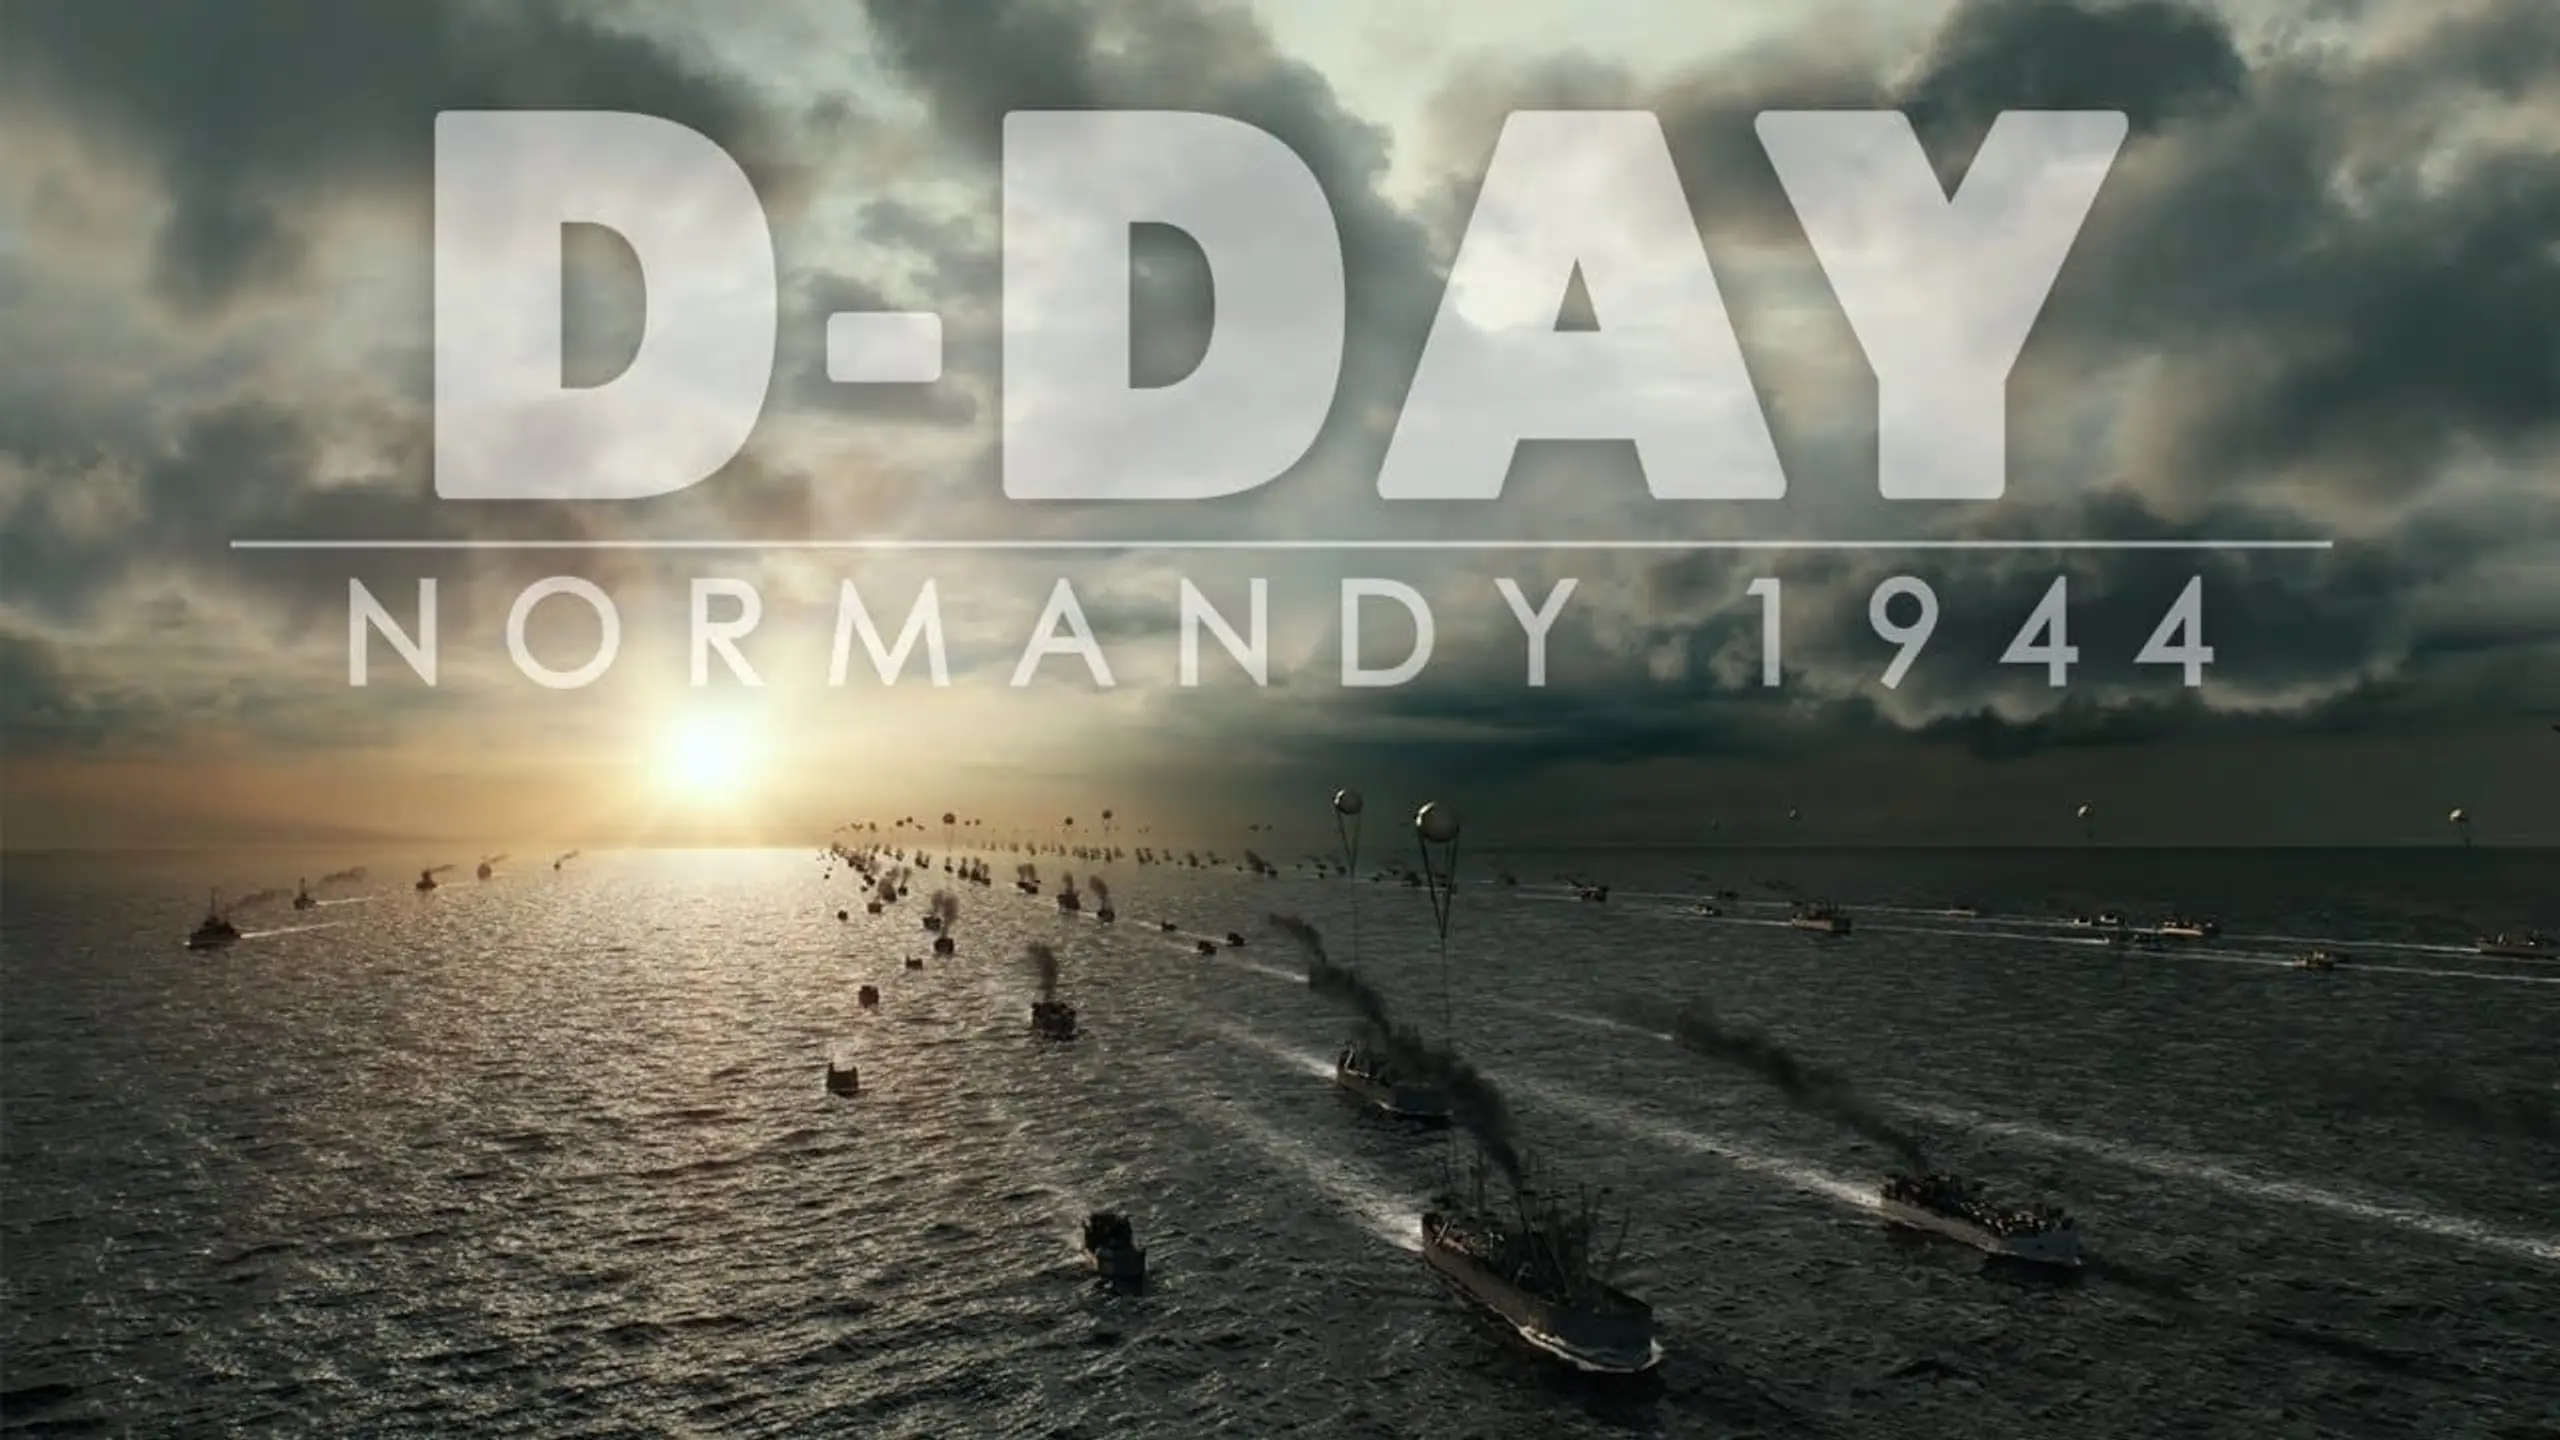 D-Day: The True Story of Omaha